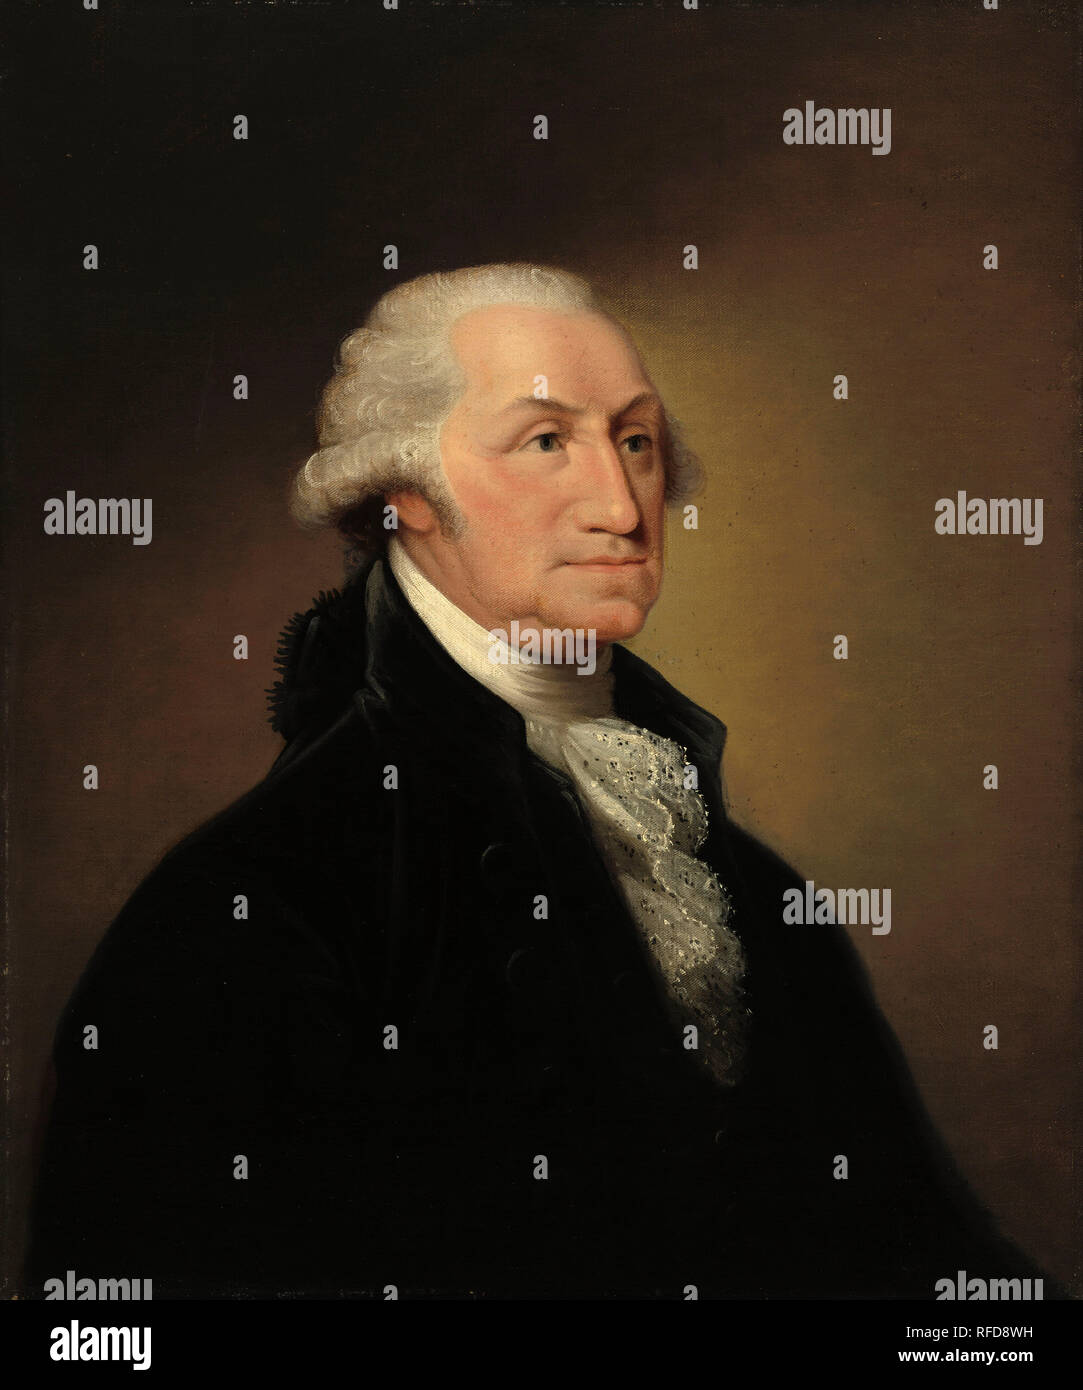 George Washington. Dated: c. 1796. Dimensions: overall: 76.1 x 63.3 cm (29 15/16 x 24 15/16 in.). Medium: oil on canvas. Museum: National Gallery of Art, Washington DC. Author: Edward Savage. Stock Photo